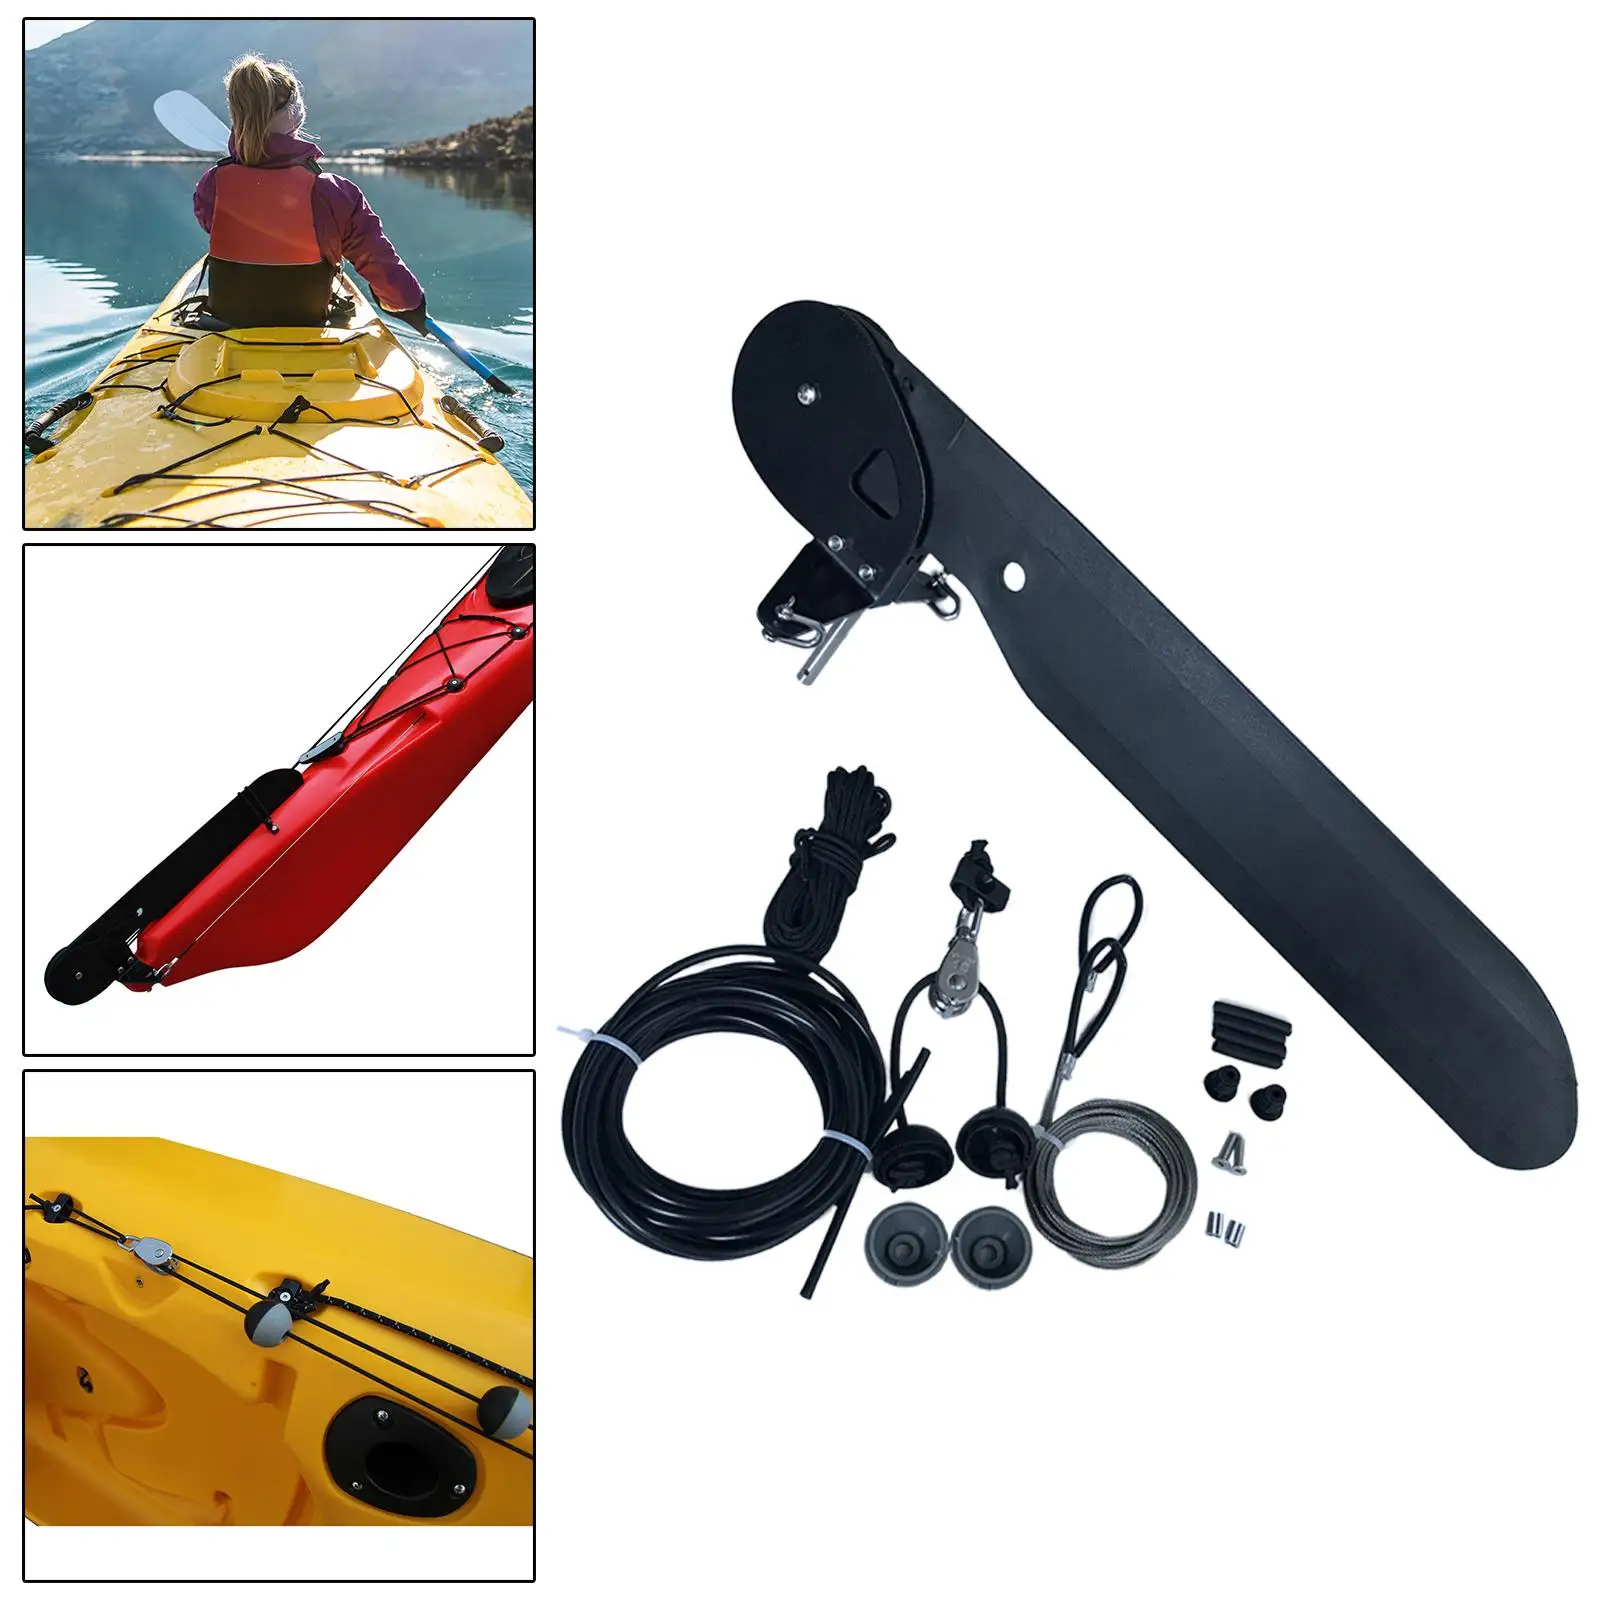 Rudder Foot Control for Kayak Boats, Direction Adjustable for Canoe Stern Accessories